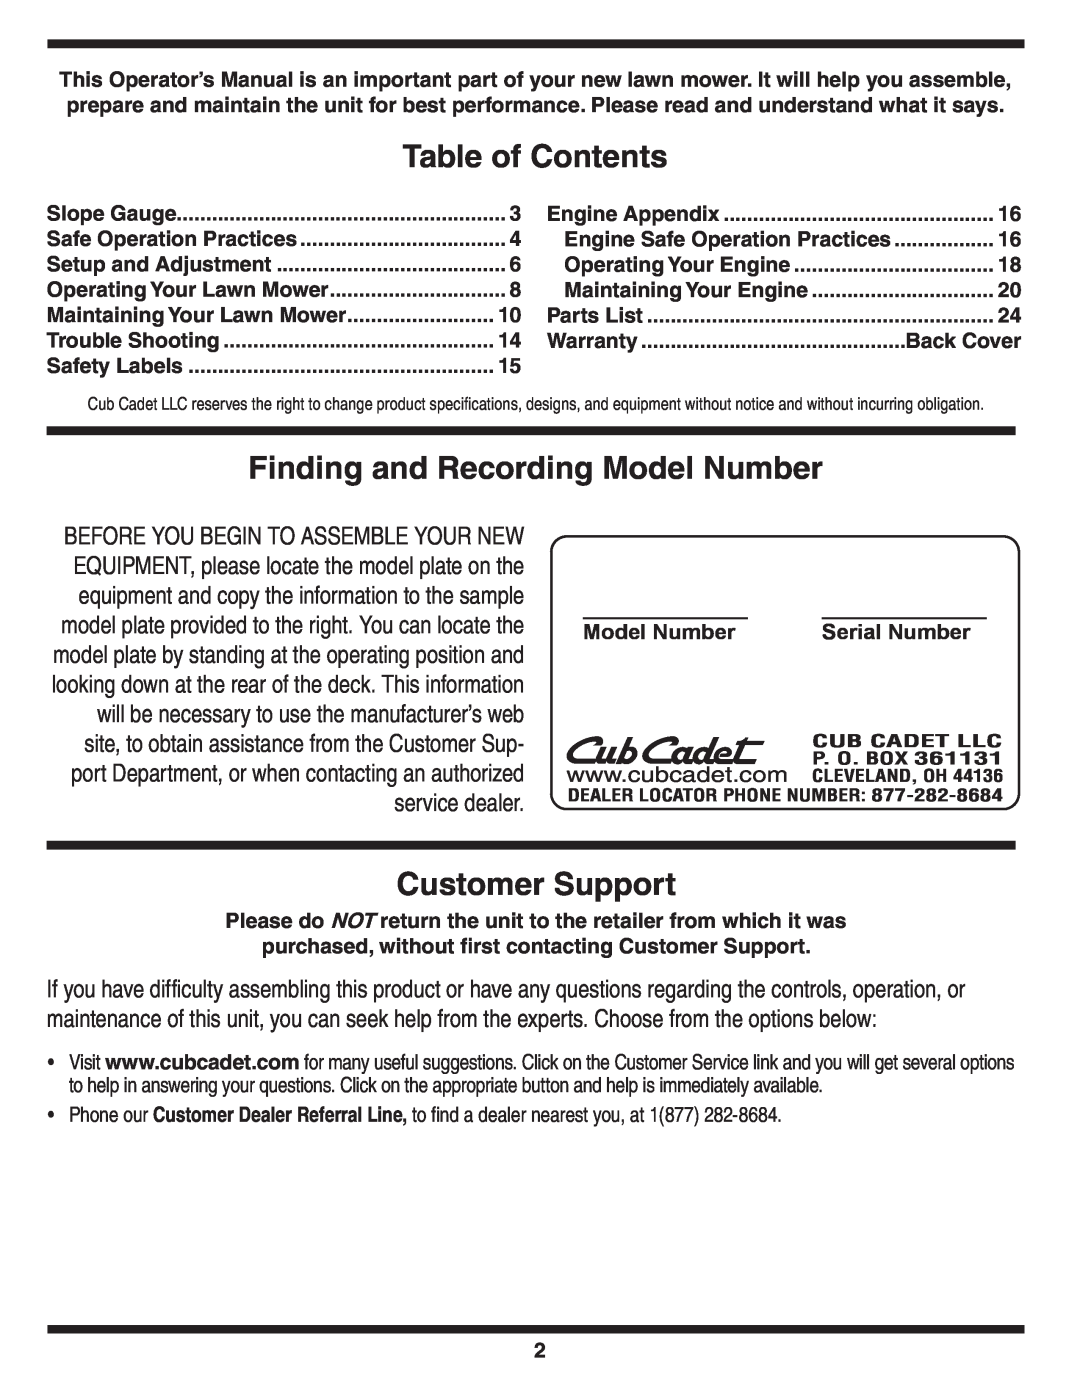 Cub Cadet 18M warranty Table of Contents, Finding and Recording Model Number, Customer Support, Serial Number 